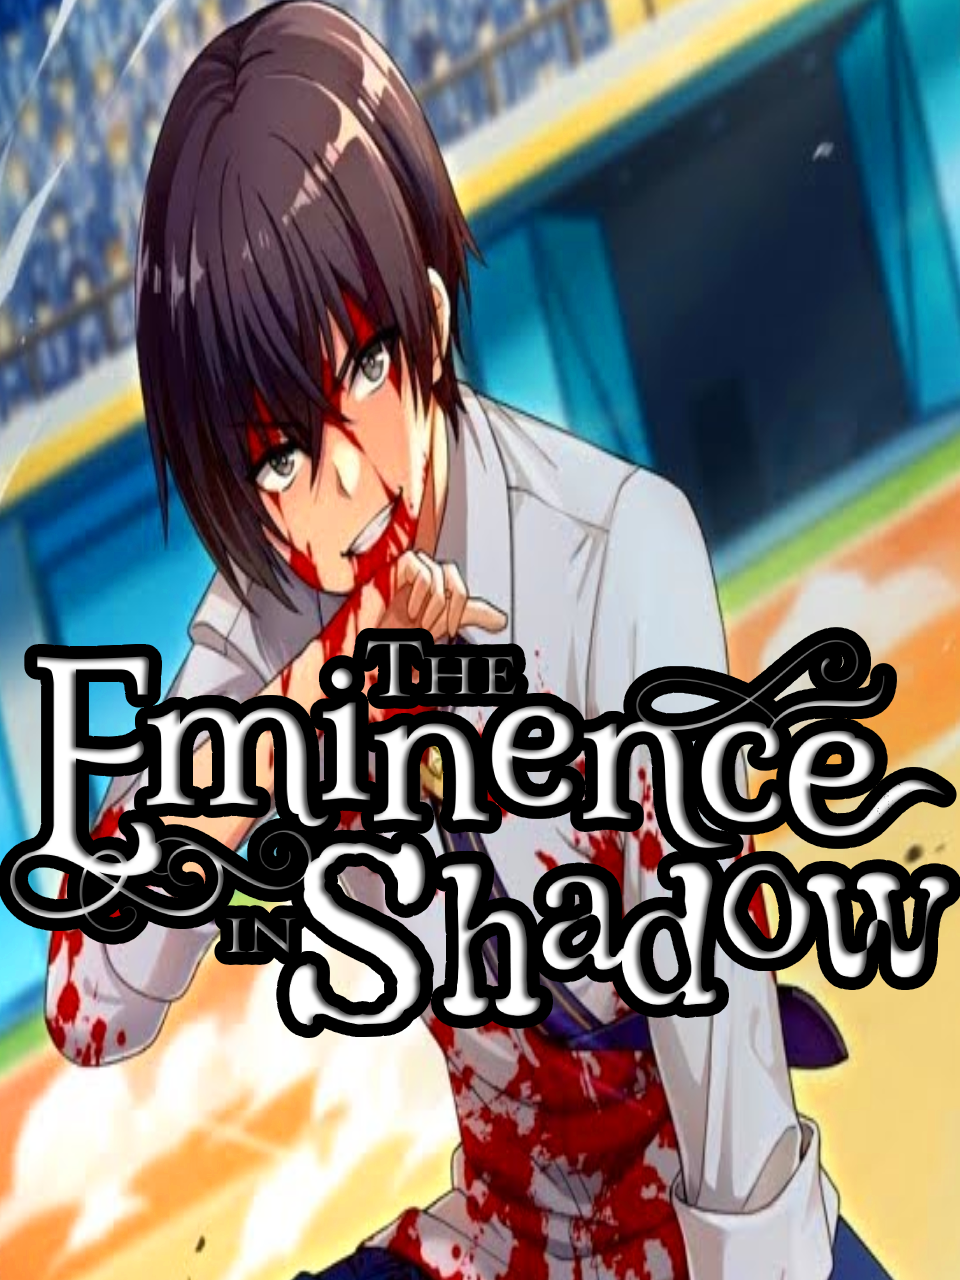 The Eminence in Shadow RPG – Game is Now Available for Mobile!